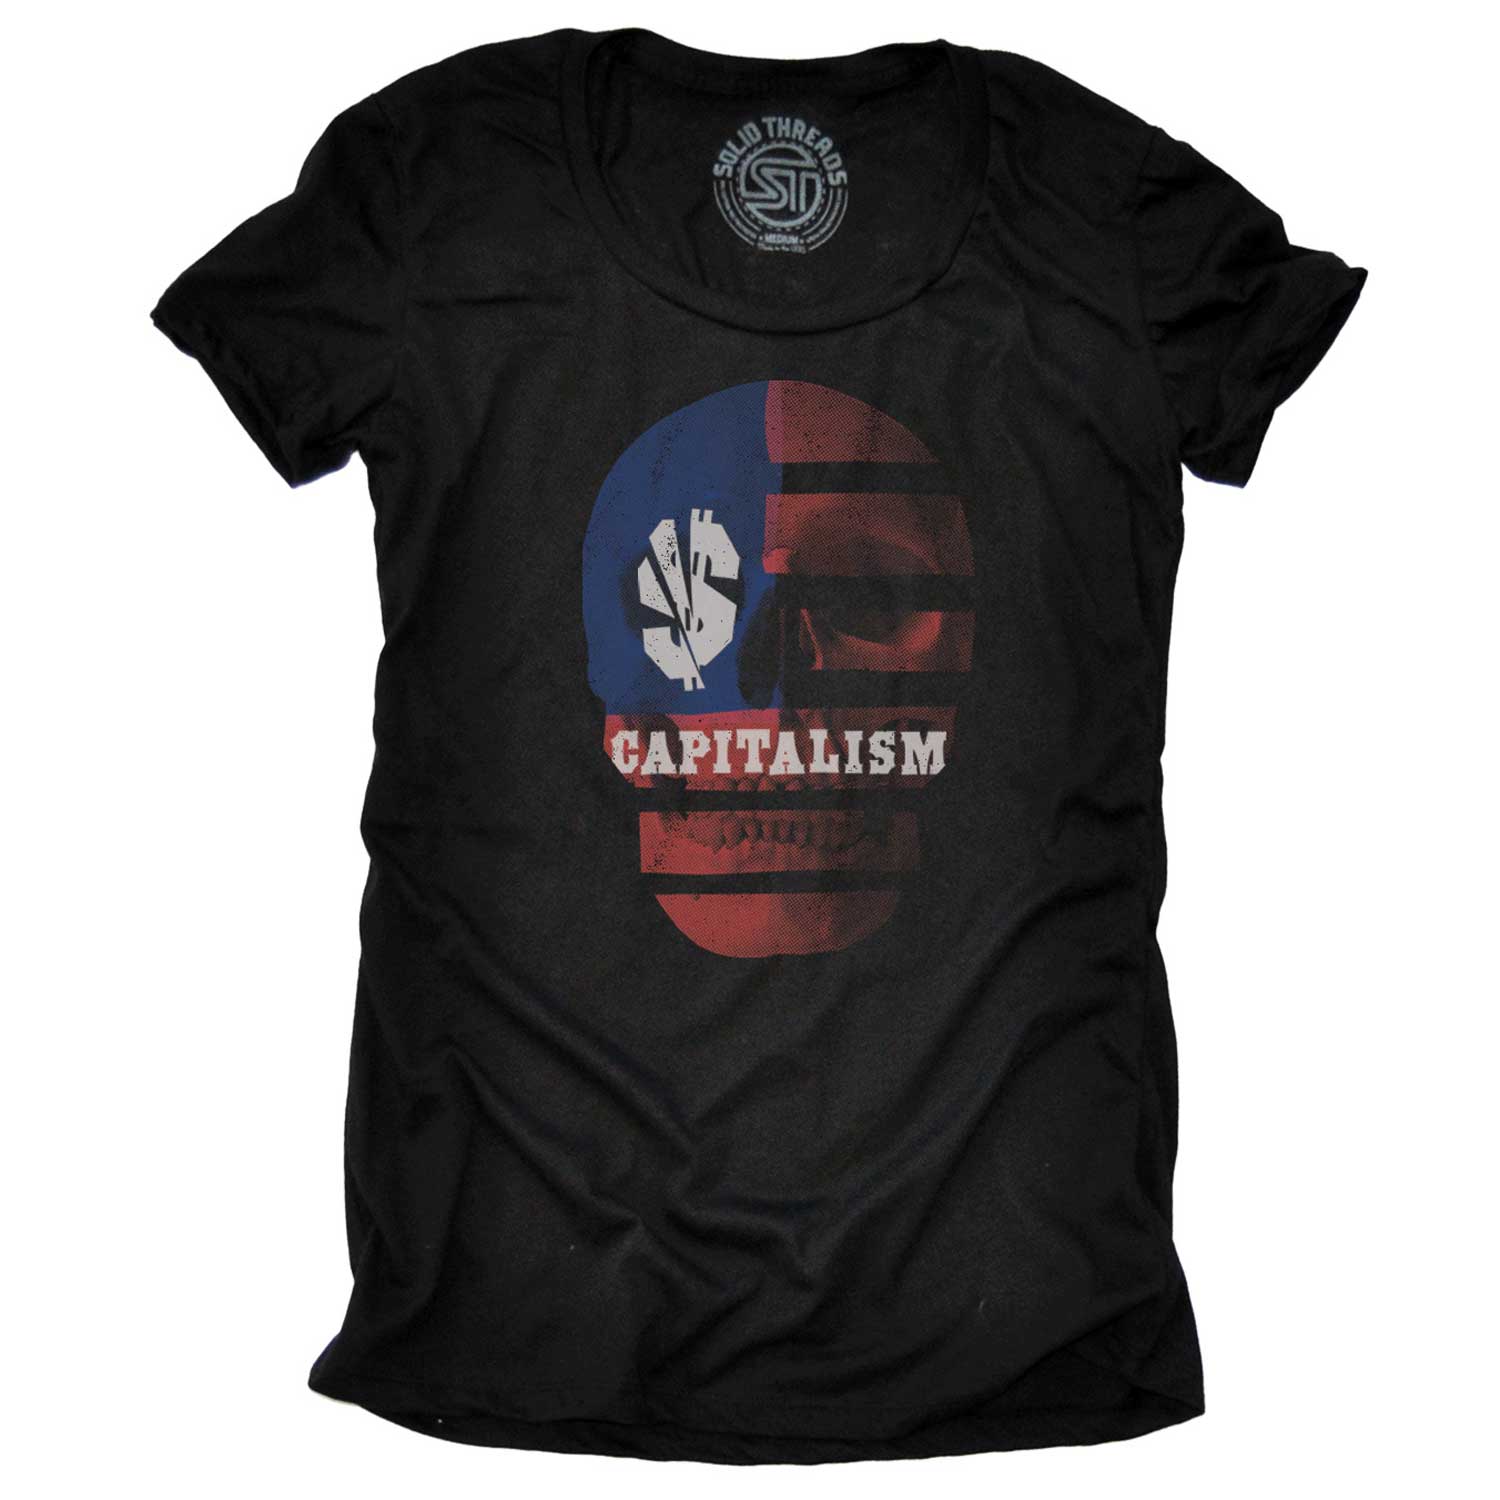 Women's Capitalism Skull Cool Socialist Graphic T-Shirt | Vintage Activist Soft Tee | Solid Threads